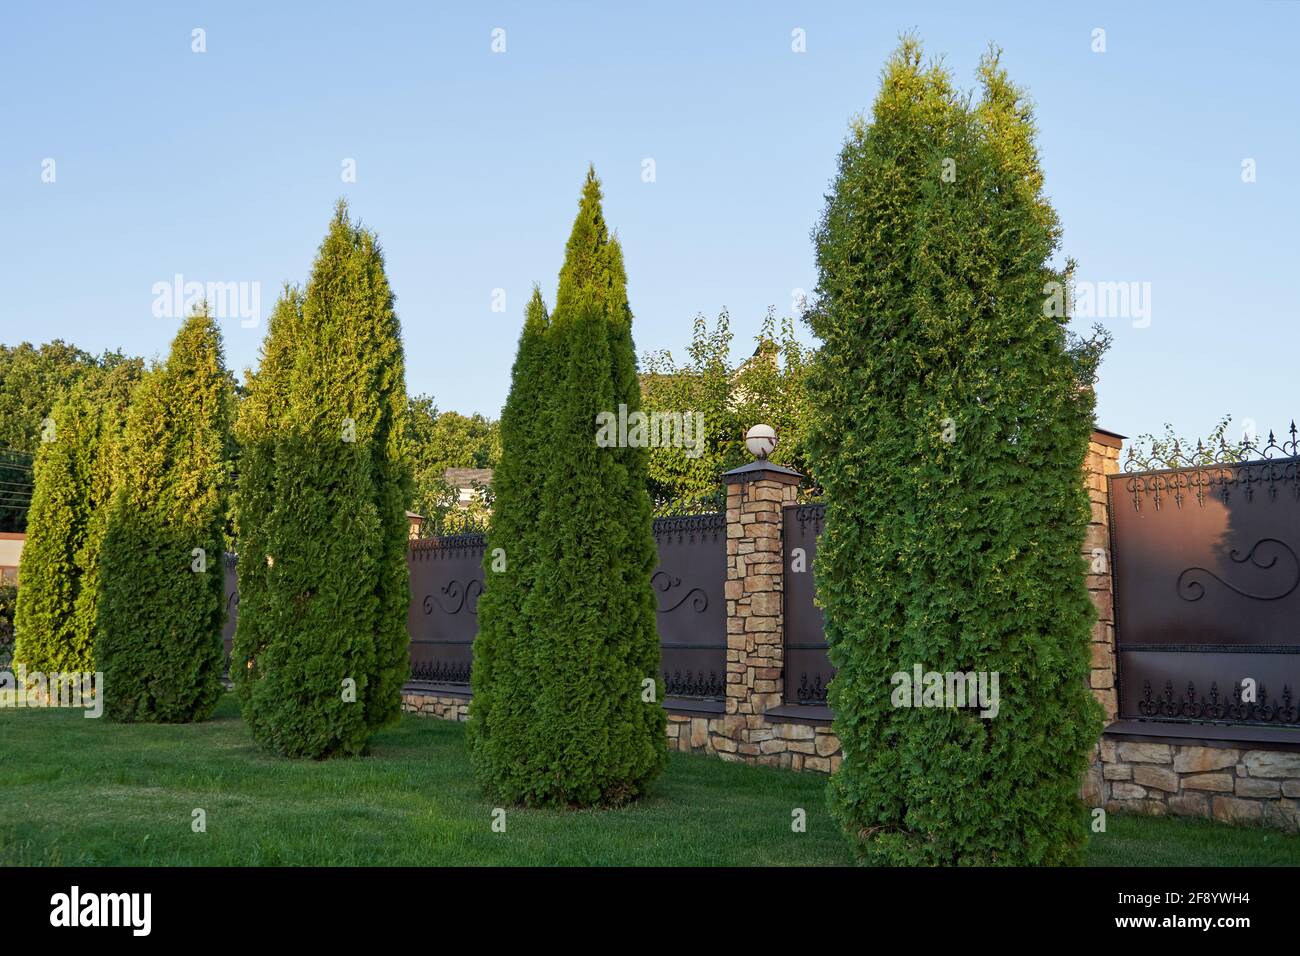 Tall thuja trees grow near the fence of a private house Stock Photo